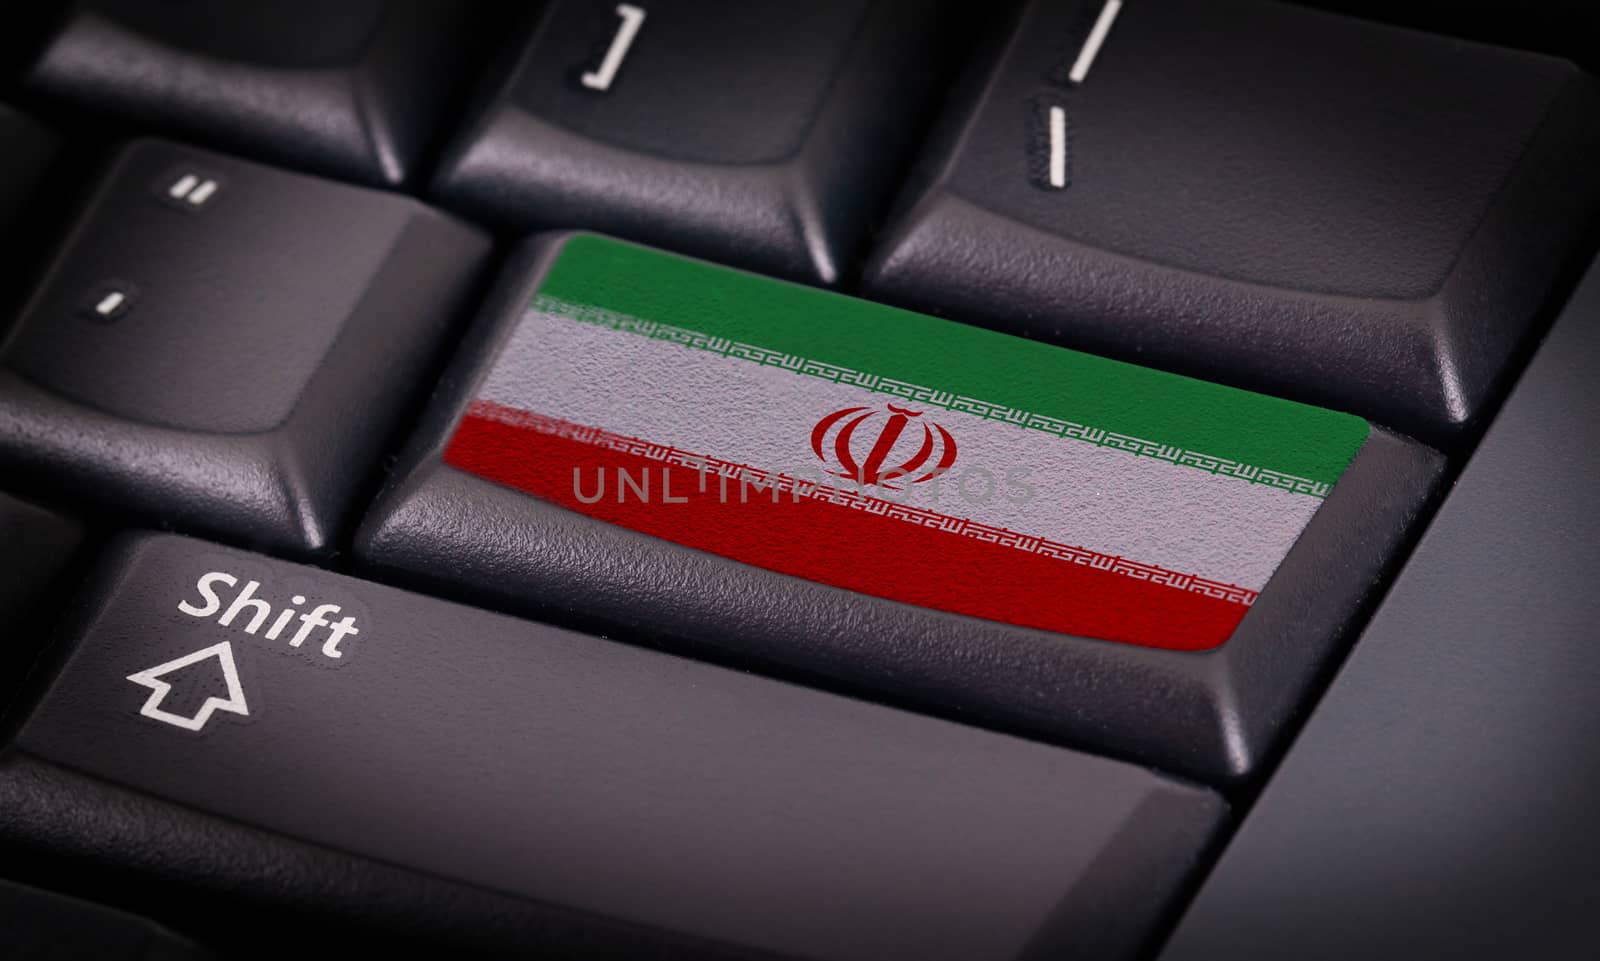 Flag on button keyboard, flag of Iran